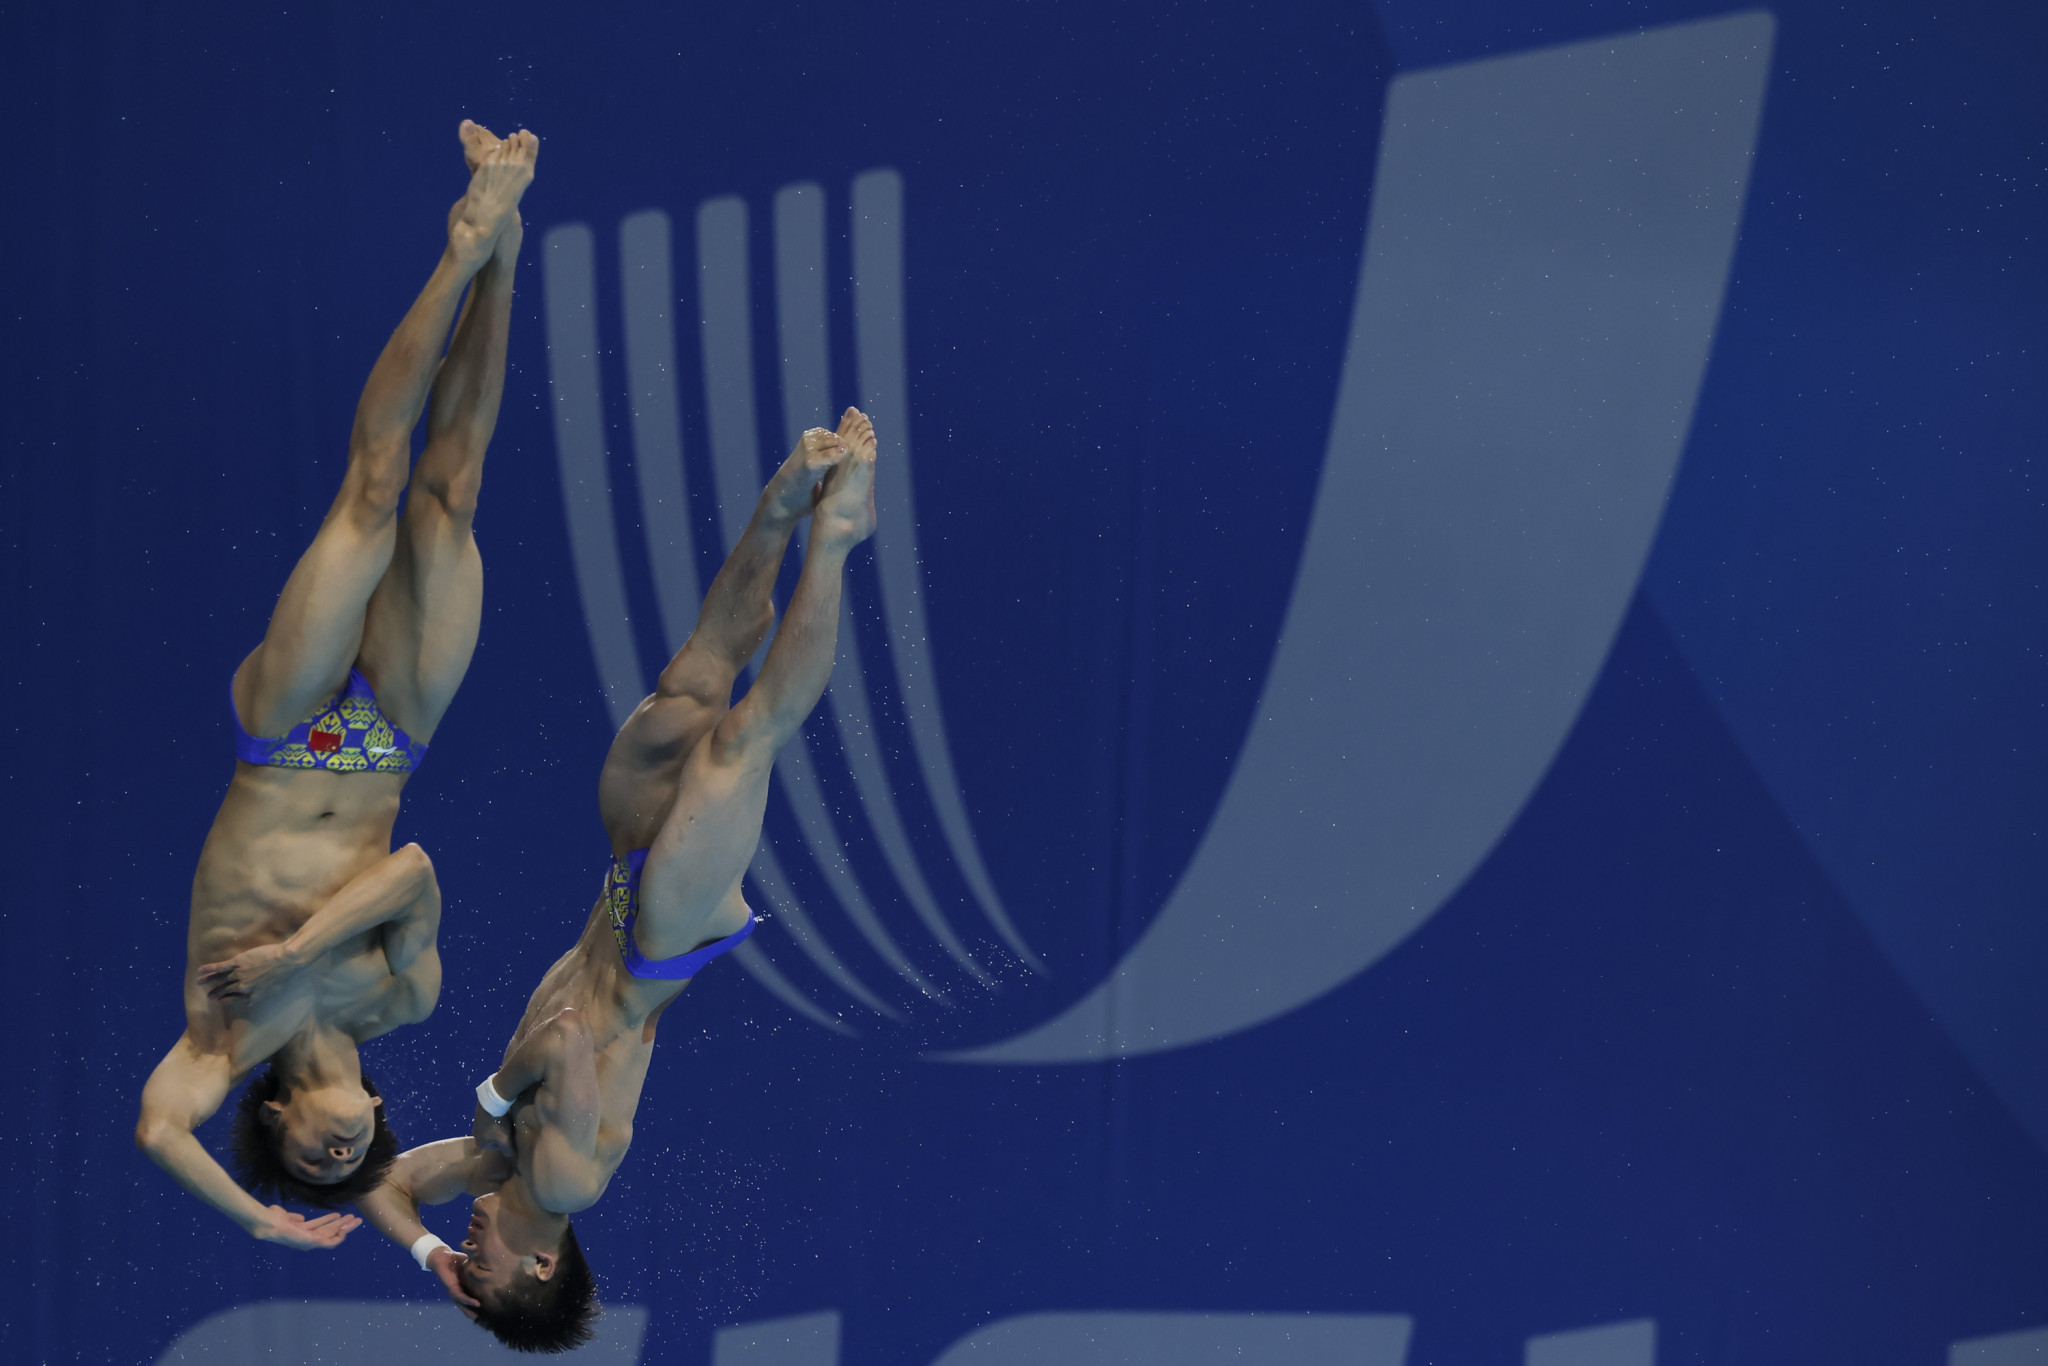 Huang Zigan, right, and Yang Ling also dominated, this time in the men's synchronised 10m platform, with a 461.22 total ©Chengdu 2021